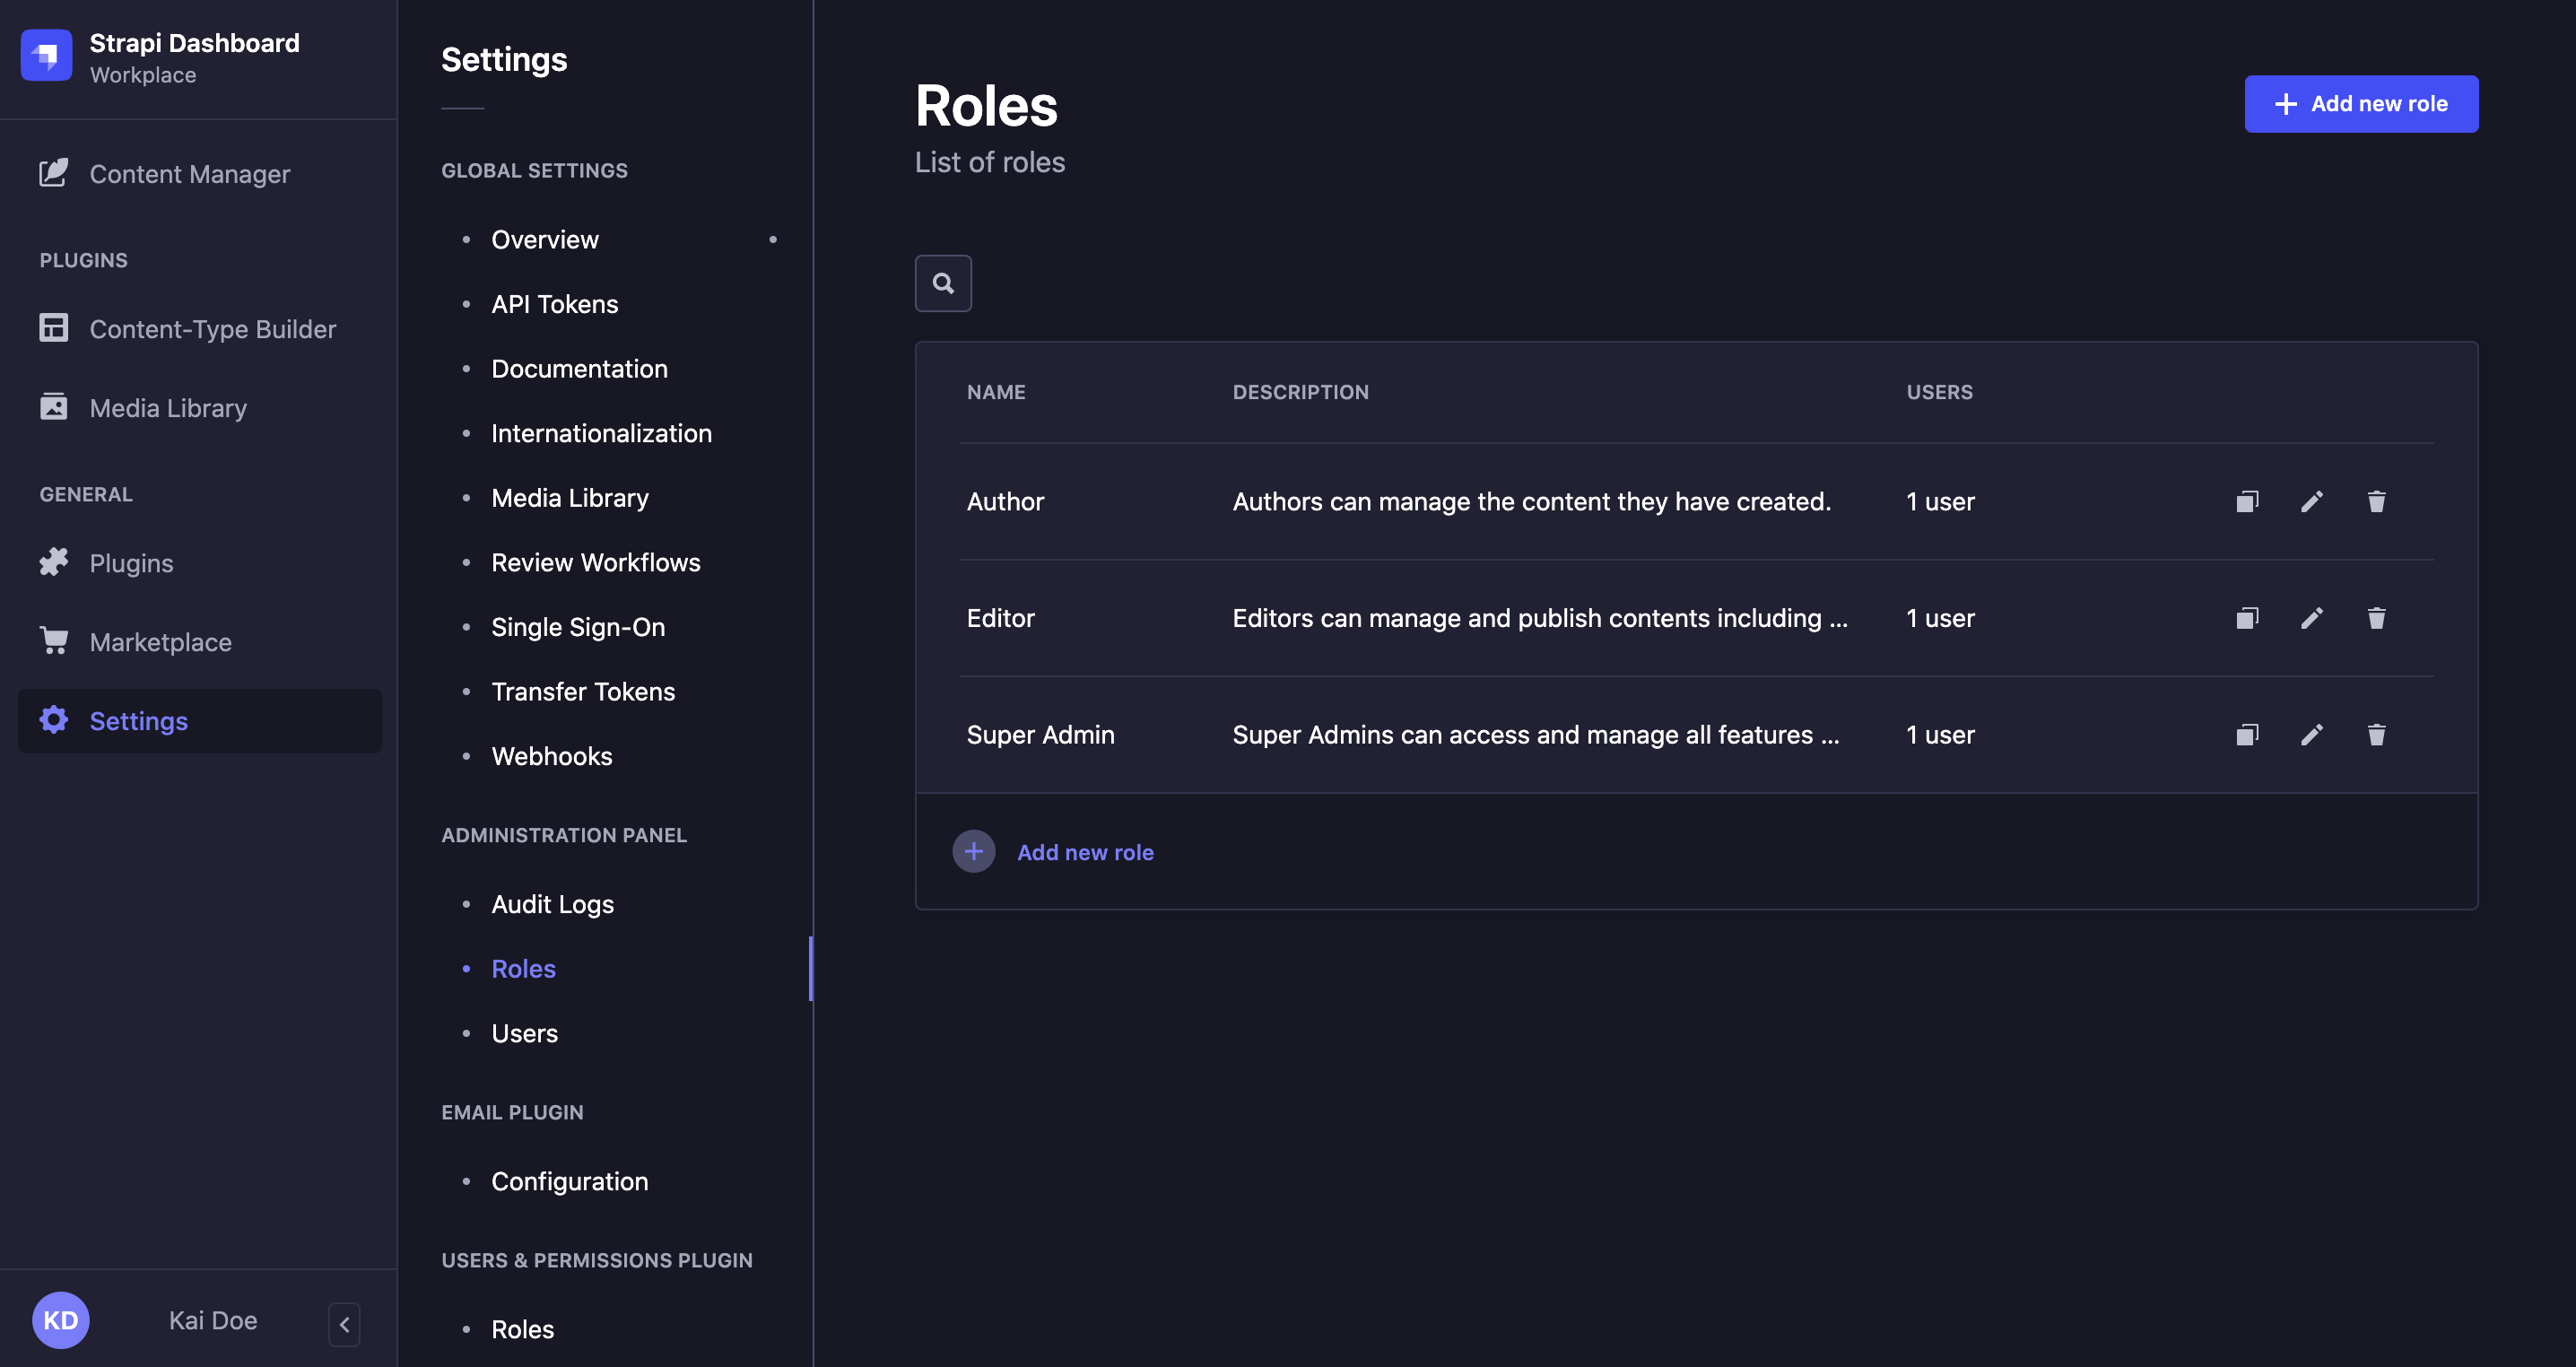 Administrator roles interface